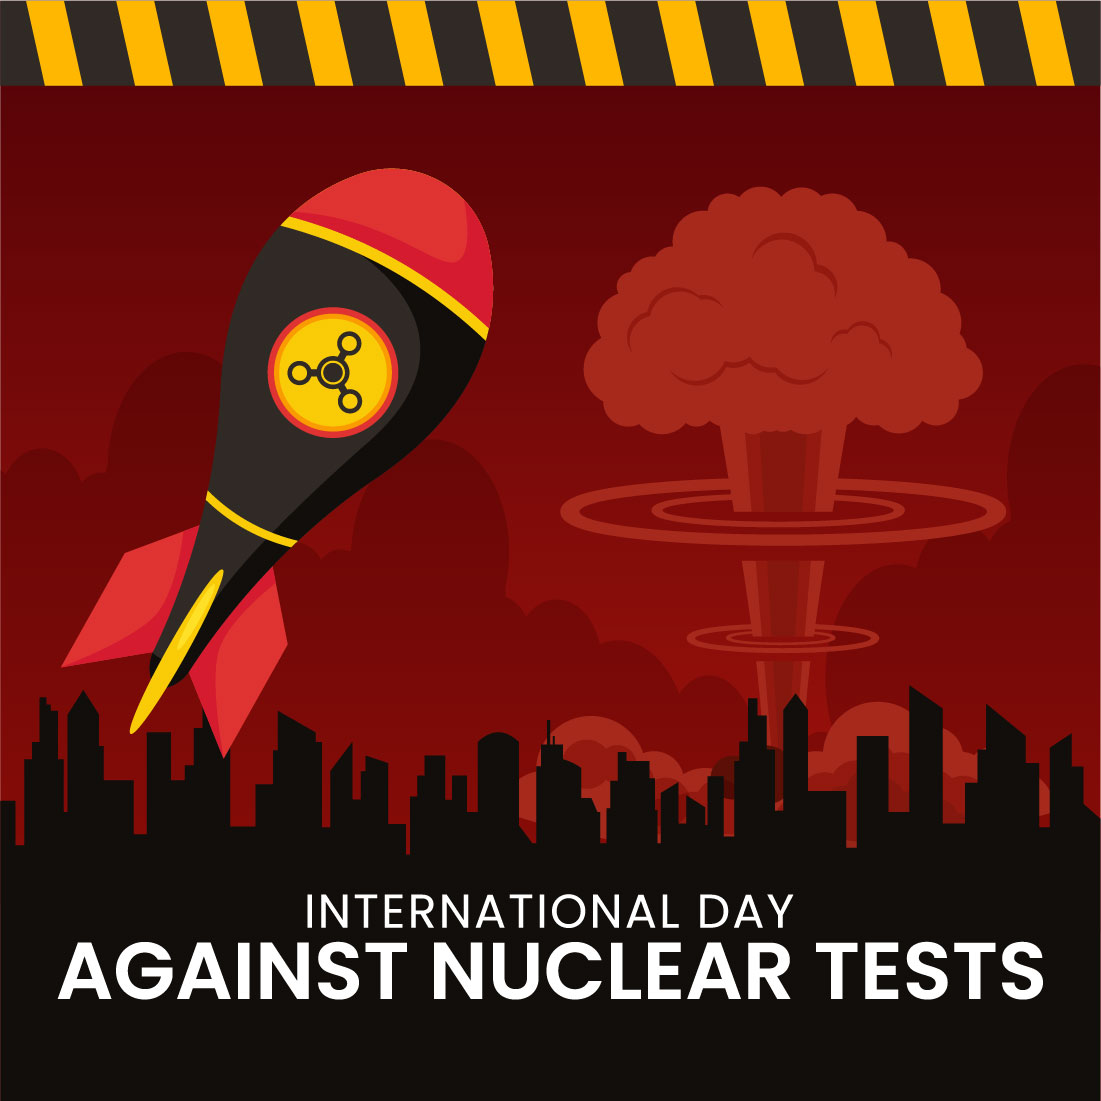 14 Day of Against Nuclear Tests Illustration cover image.